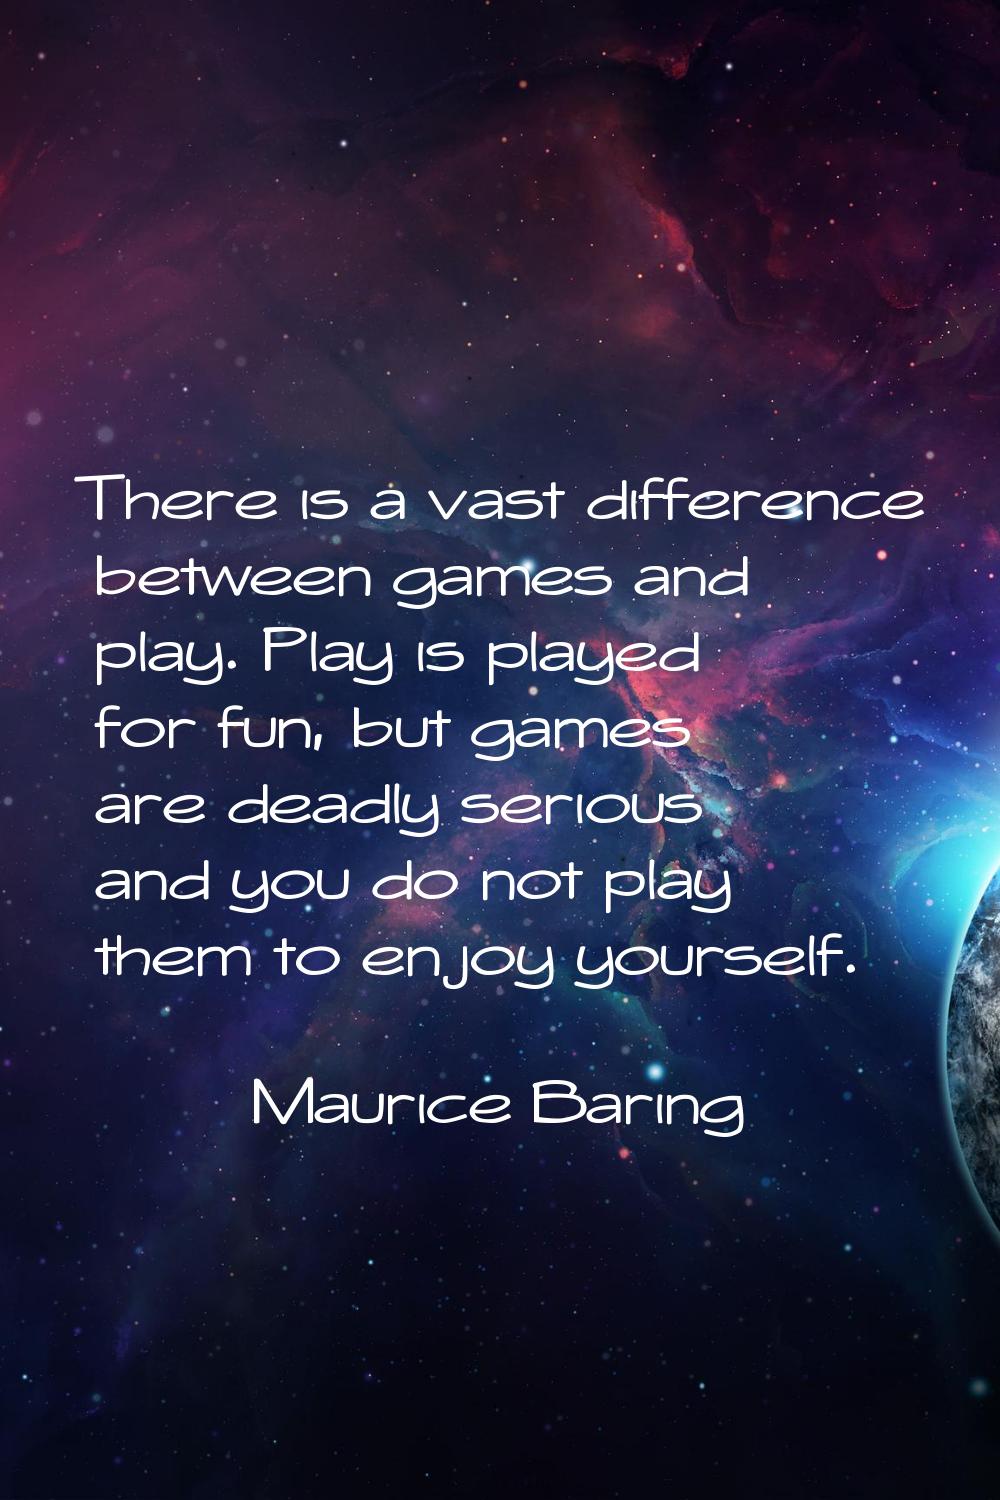 There is a vast difference between games and play. Play is played for fun, but games are deadly ser